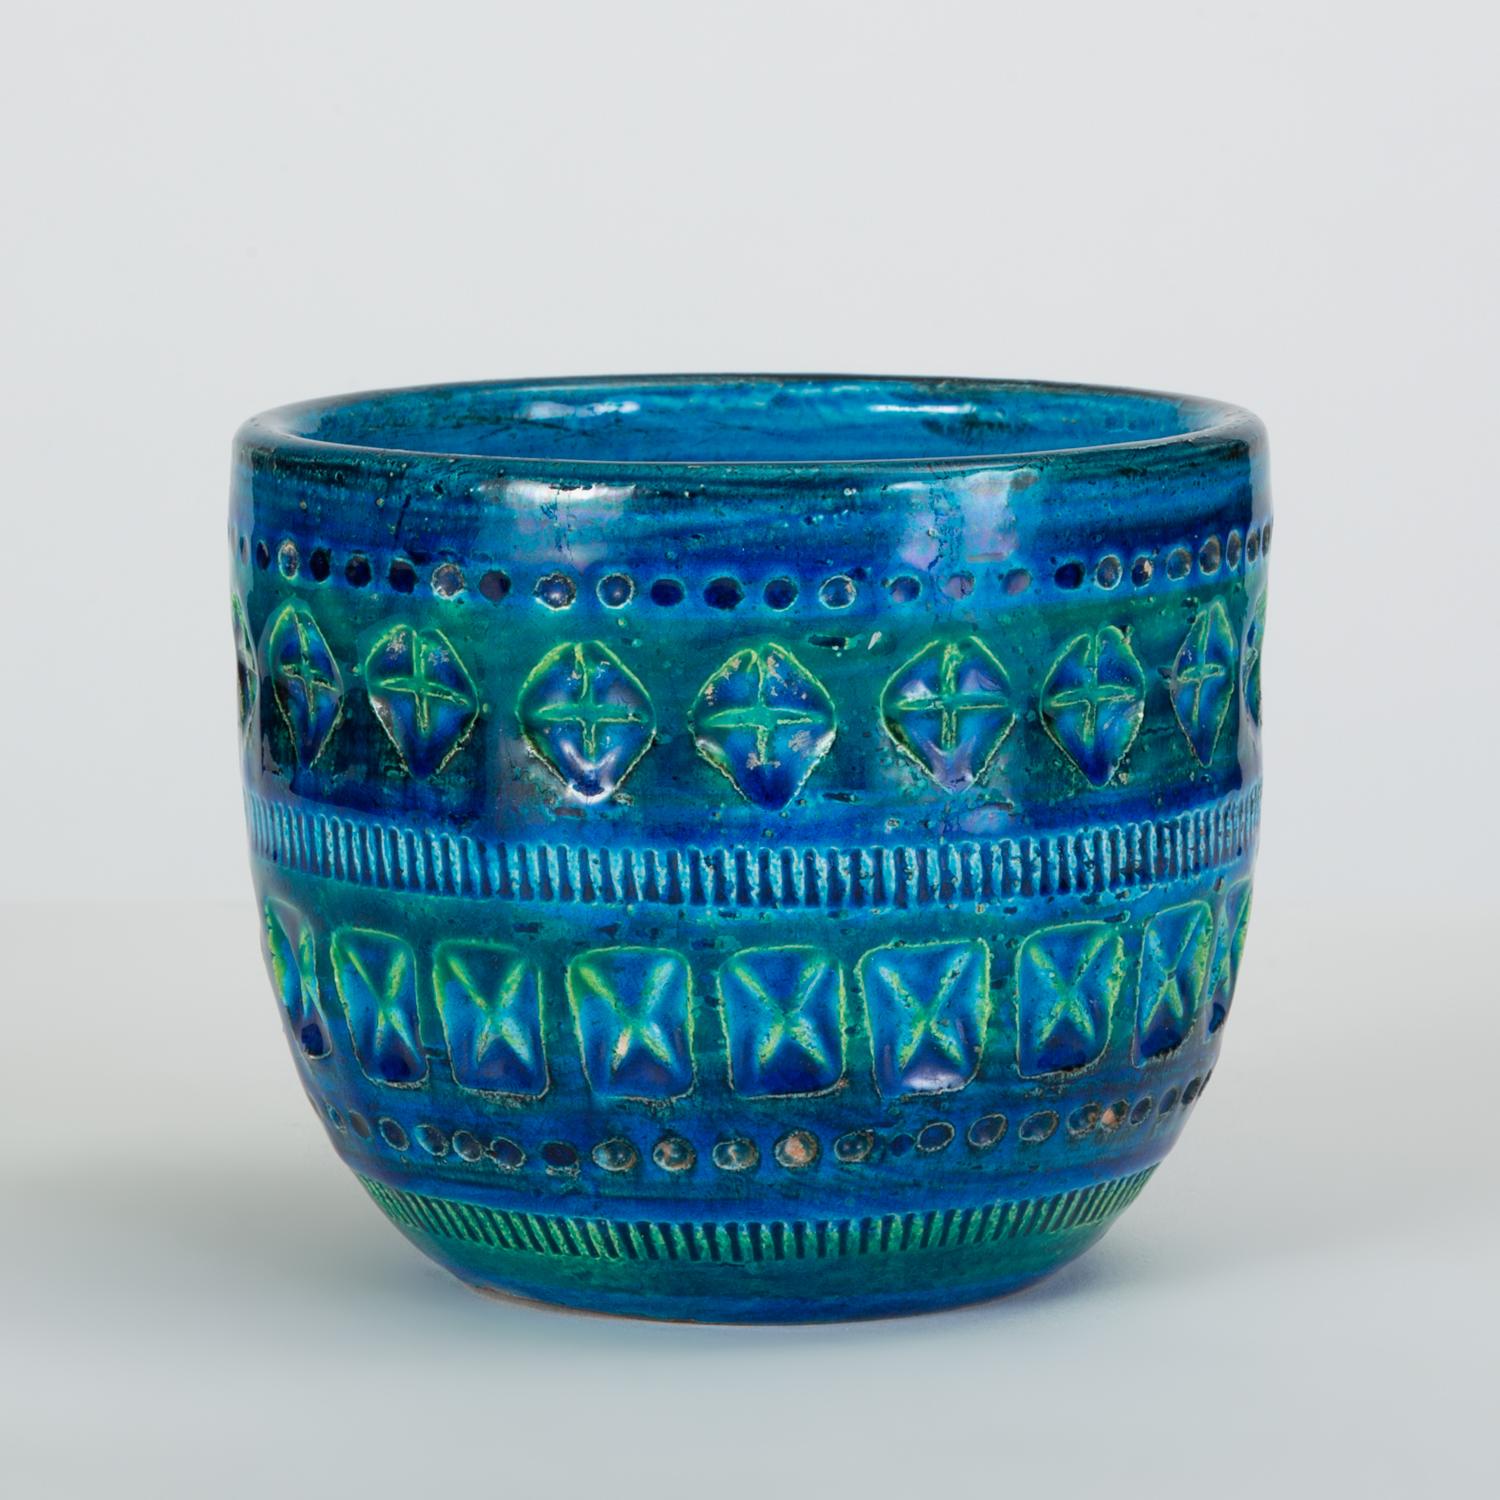 A small, deep bowl from the iconic “Rimini Blu” collection by Aldo Londi for Bitossi with its customary hand-incised geometry and variegated blue-and-green glaze. Signed with hand-painted edition number and “Italy” on bottom.

Condition: Excellent